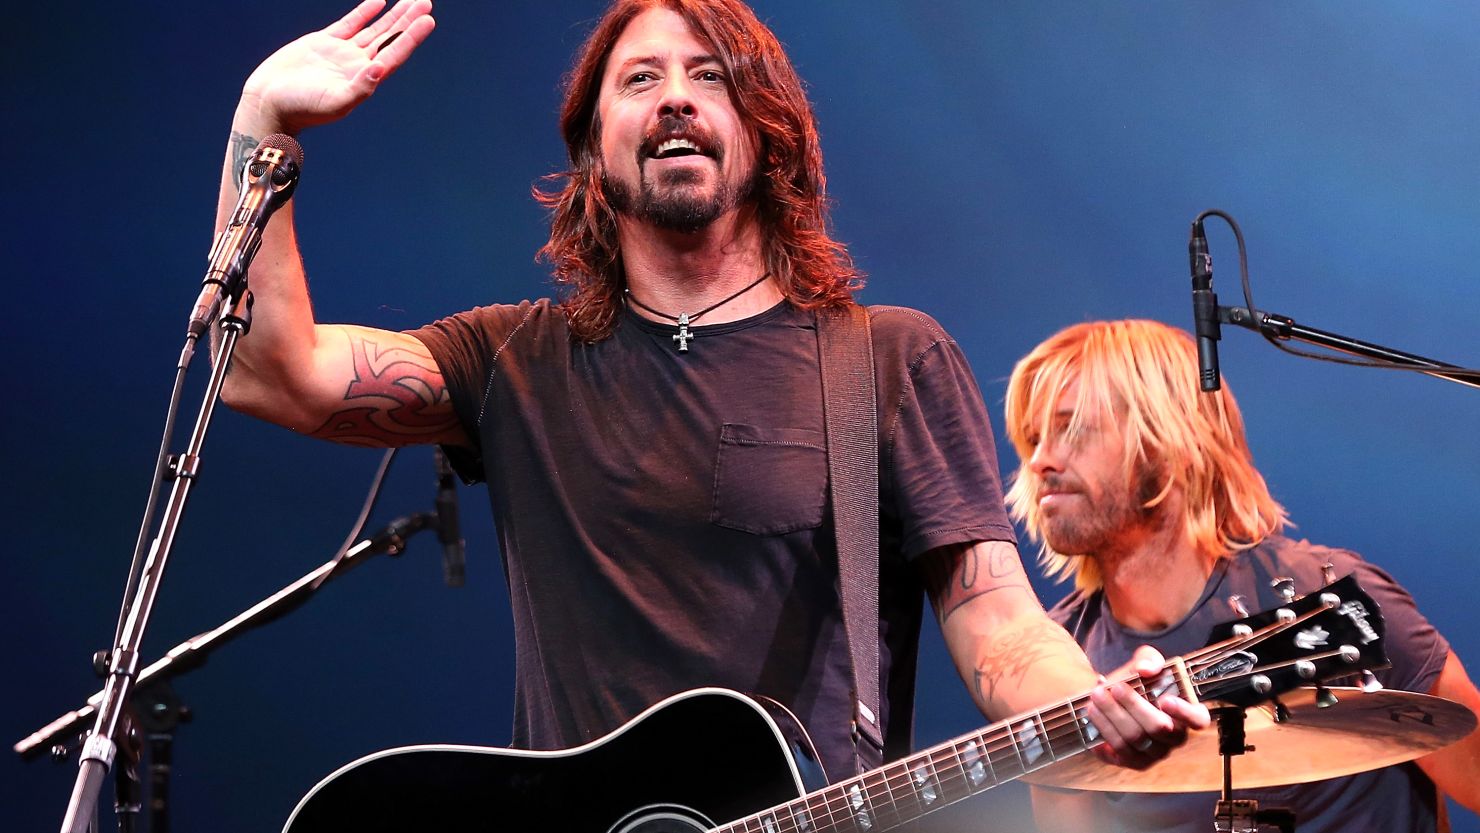 Dave Grohl and the Foo Fighters have been playing on David Letterman's "Late Show" all week.